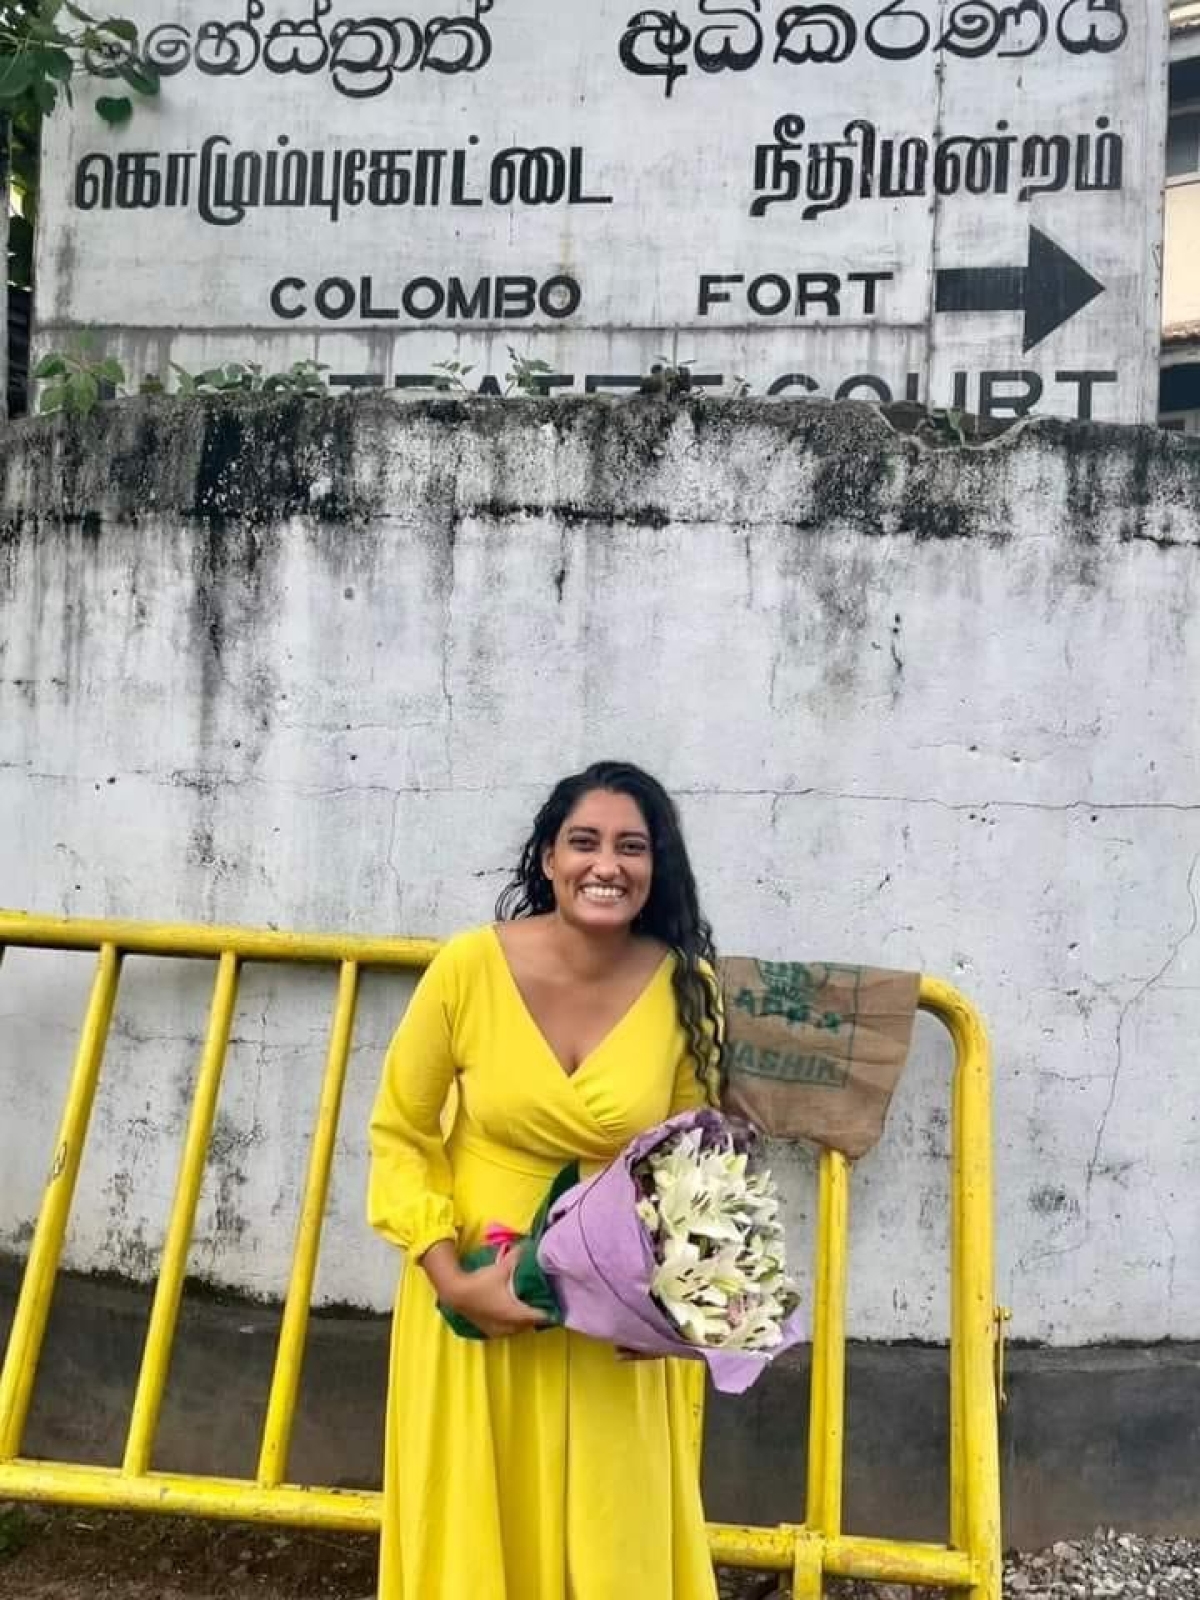 Relief for Nathasha: Stand-up Comedian No Longer in Custody: Greeted by Well-wishers Upon Release